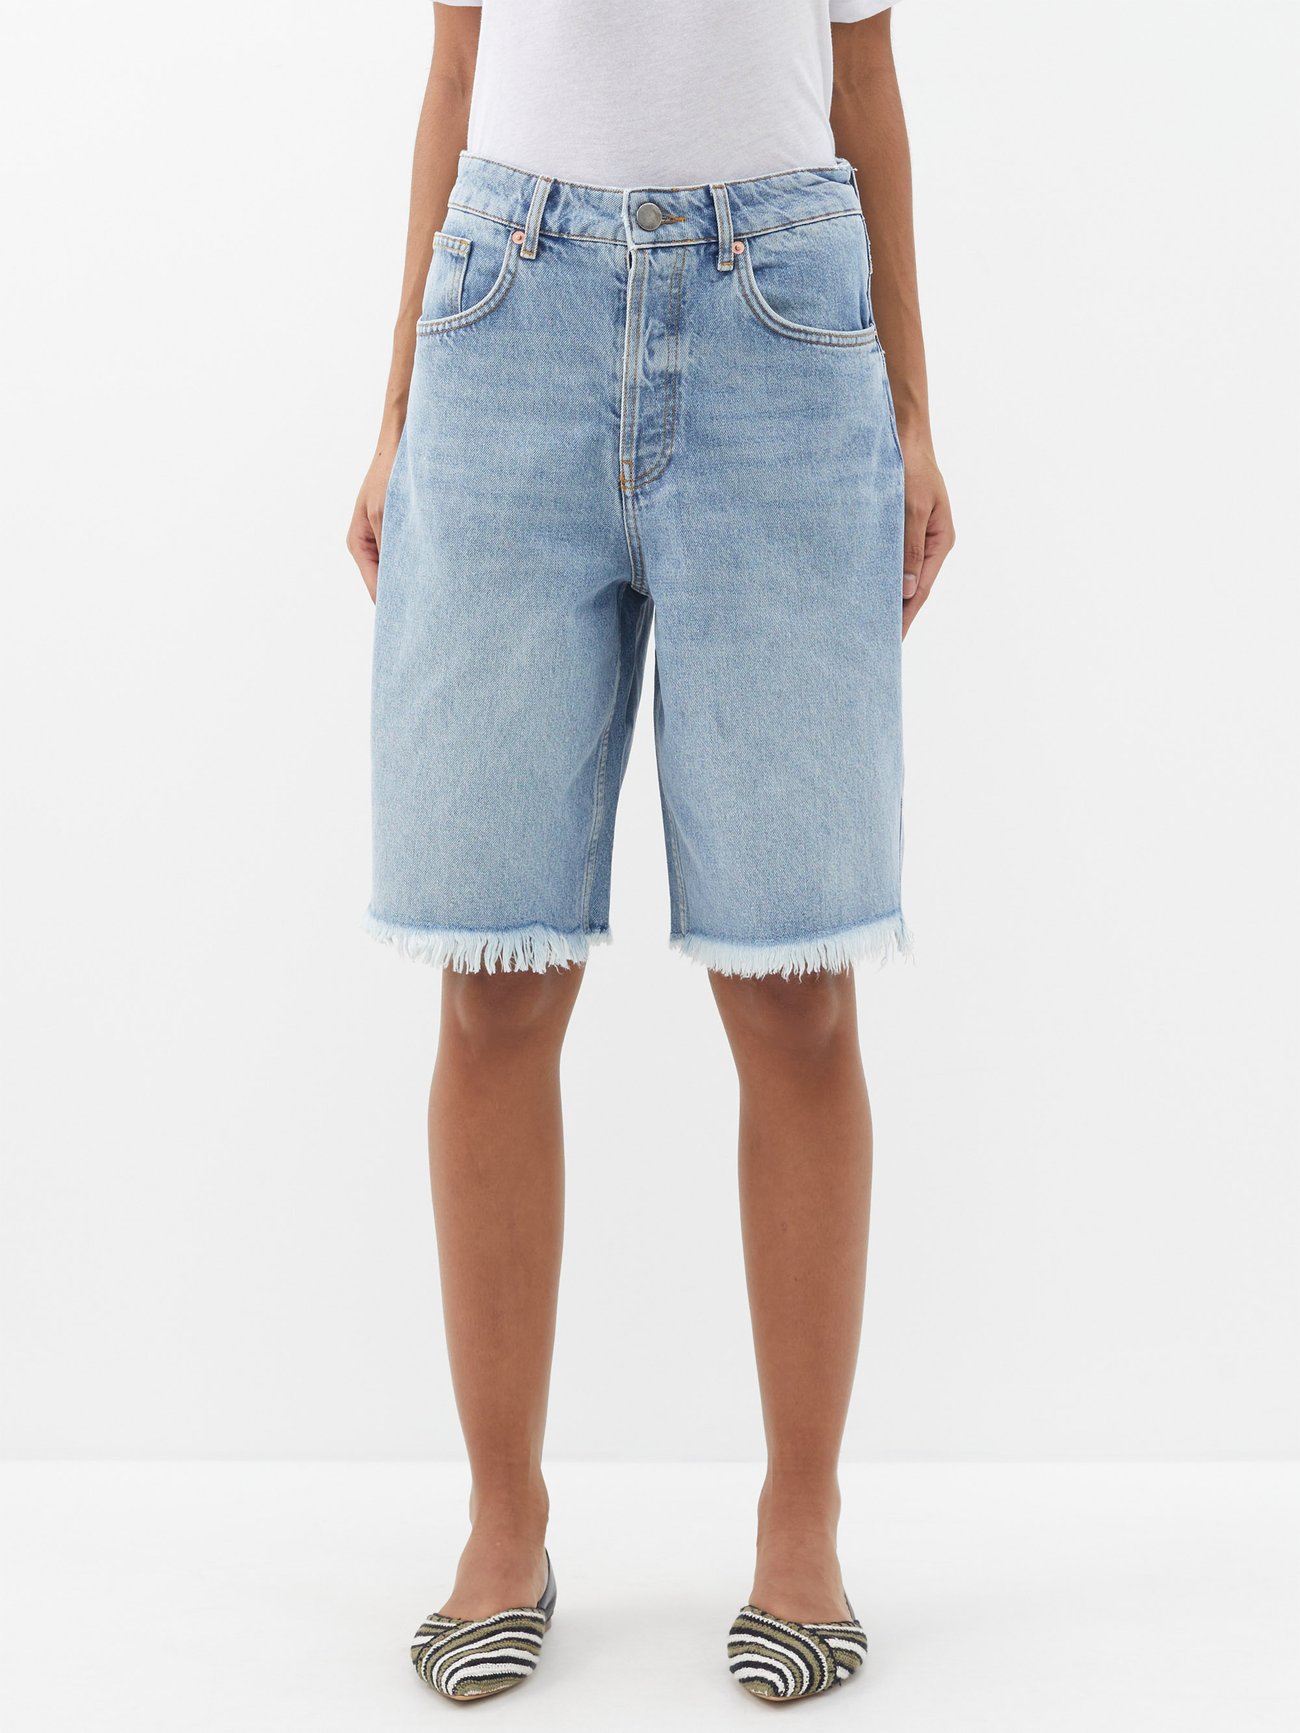 jorts trend 2024 - Raey models these light blue organic-denim shorts on 1990s shapes, reflected by the longline shape and raw-edge cuffs.